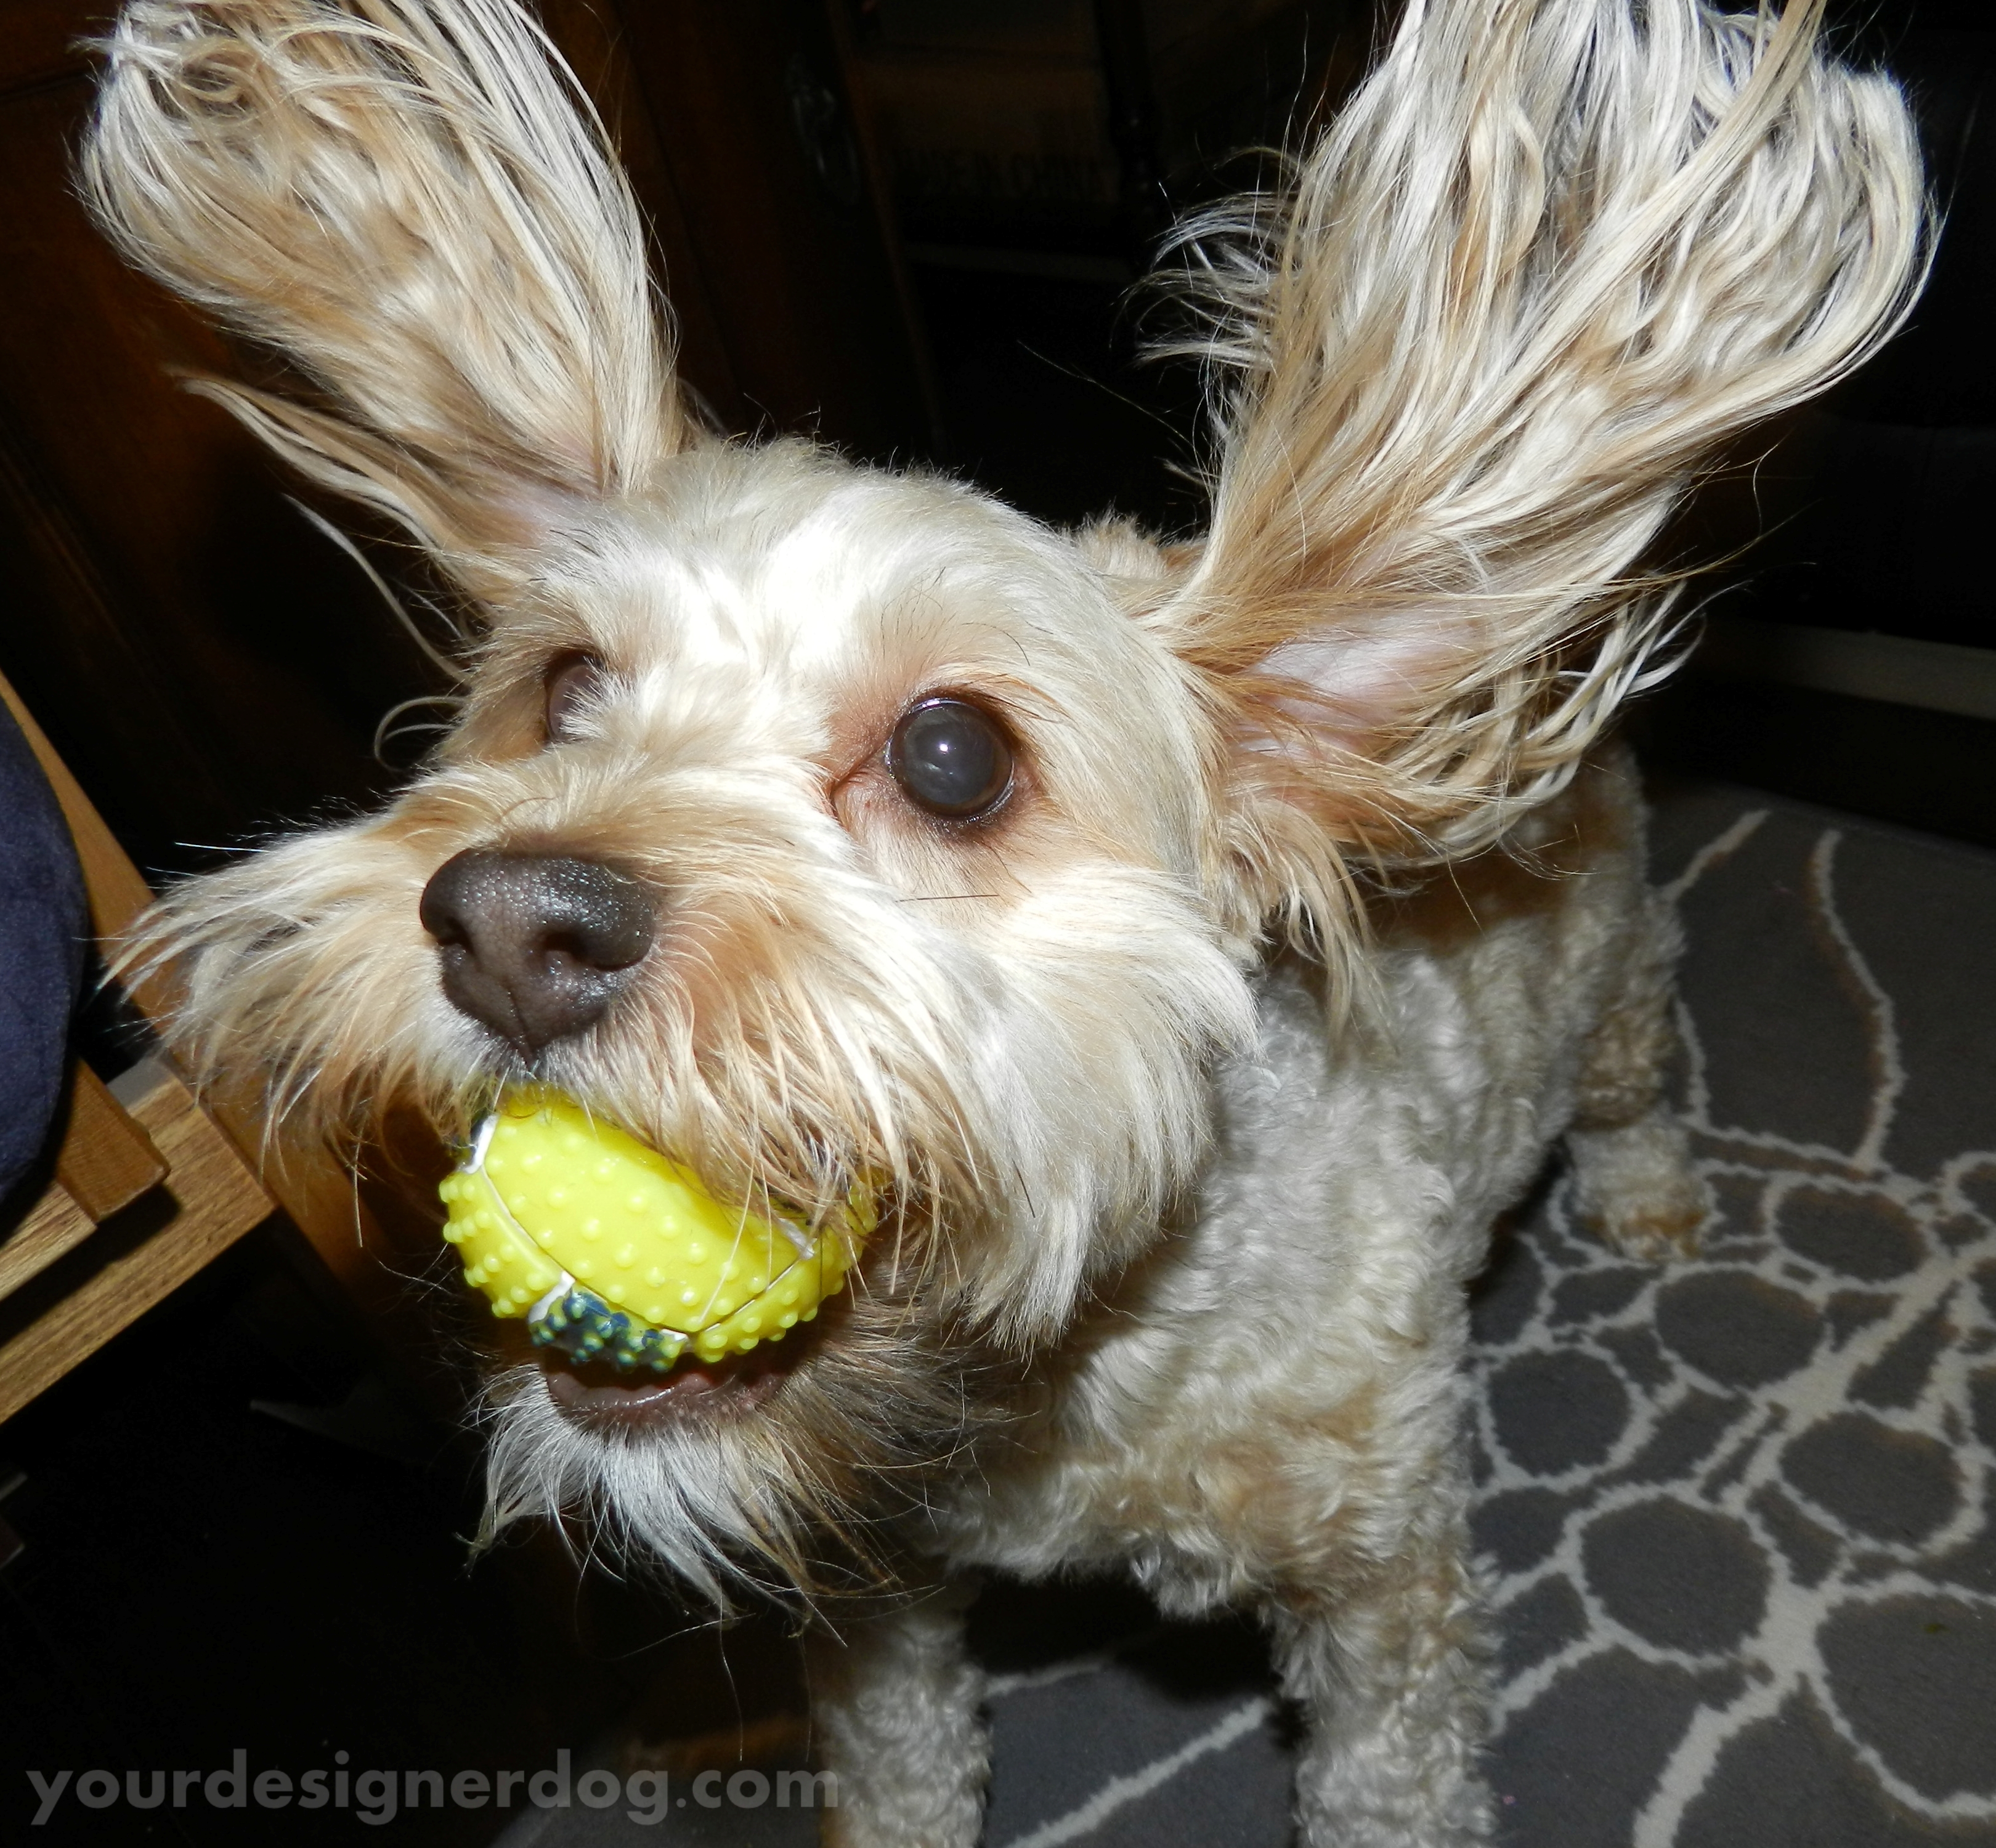 dogs, designer dogs, yorkipoo, yorkie poo, squeaky ball, poetry